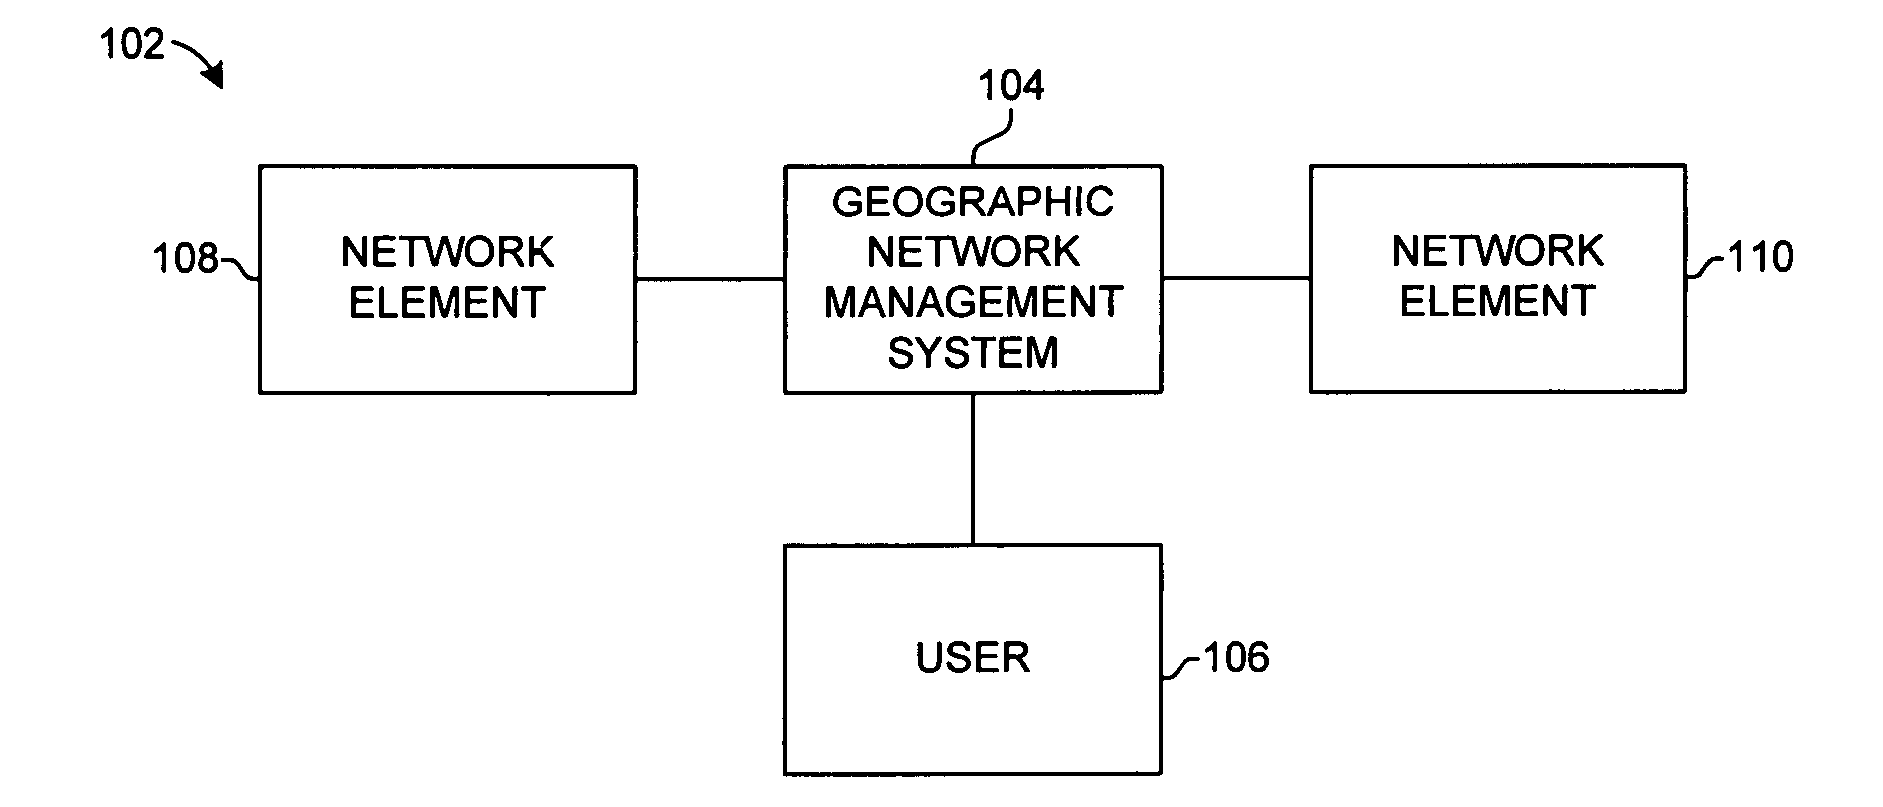 Geographic management system